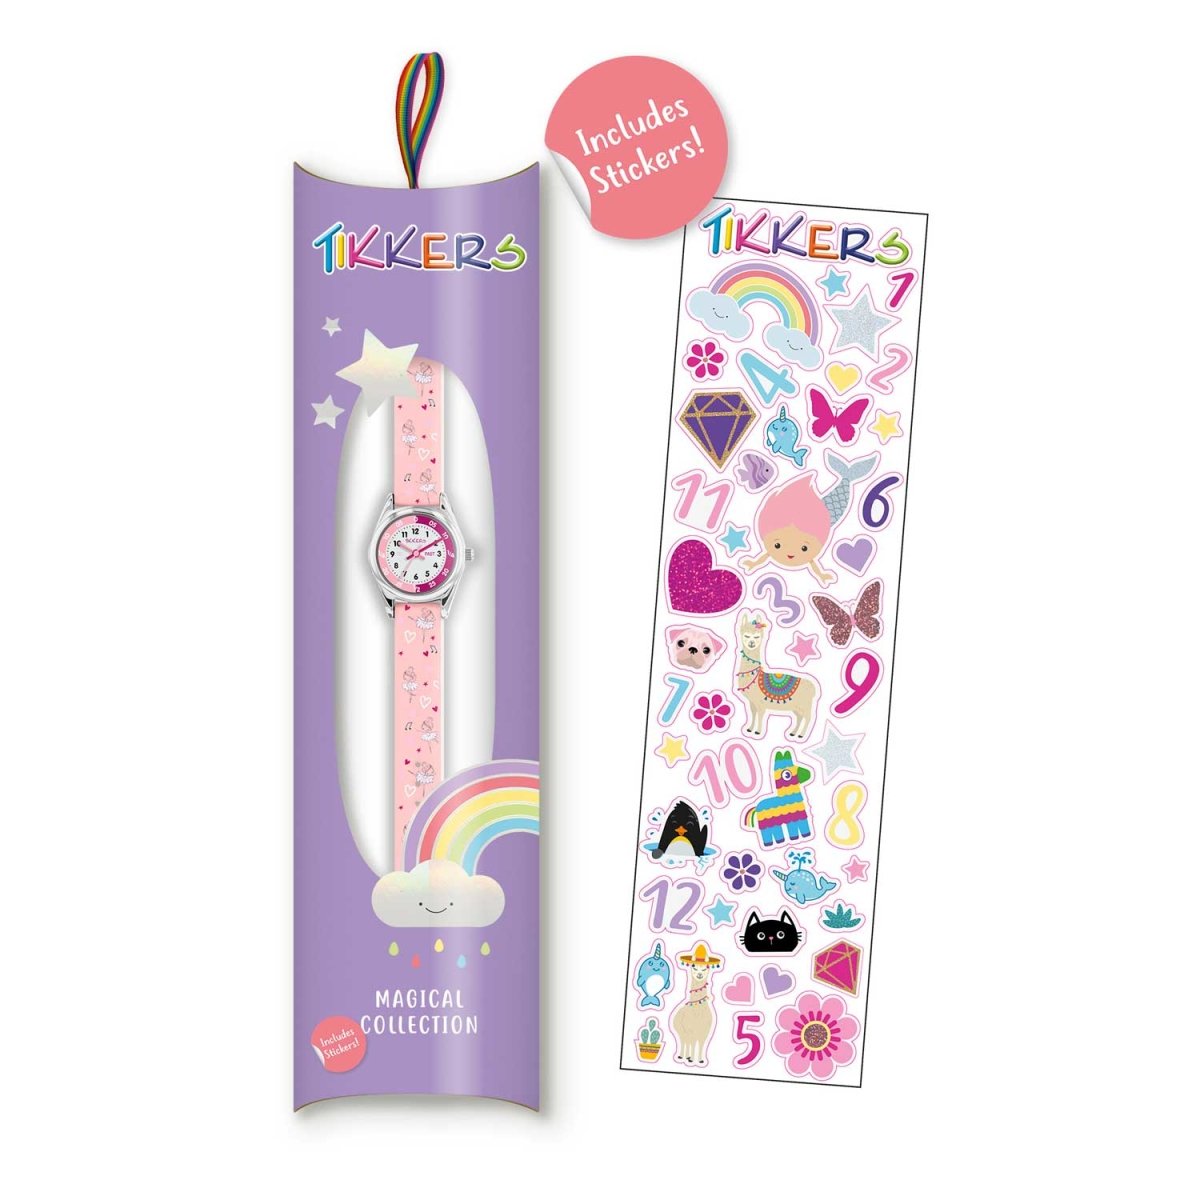 Tikkers TK0205 Kids Loveheart Collection Pink Silicon Strap - Κοσμηματοπωλείο Goldy